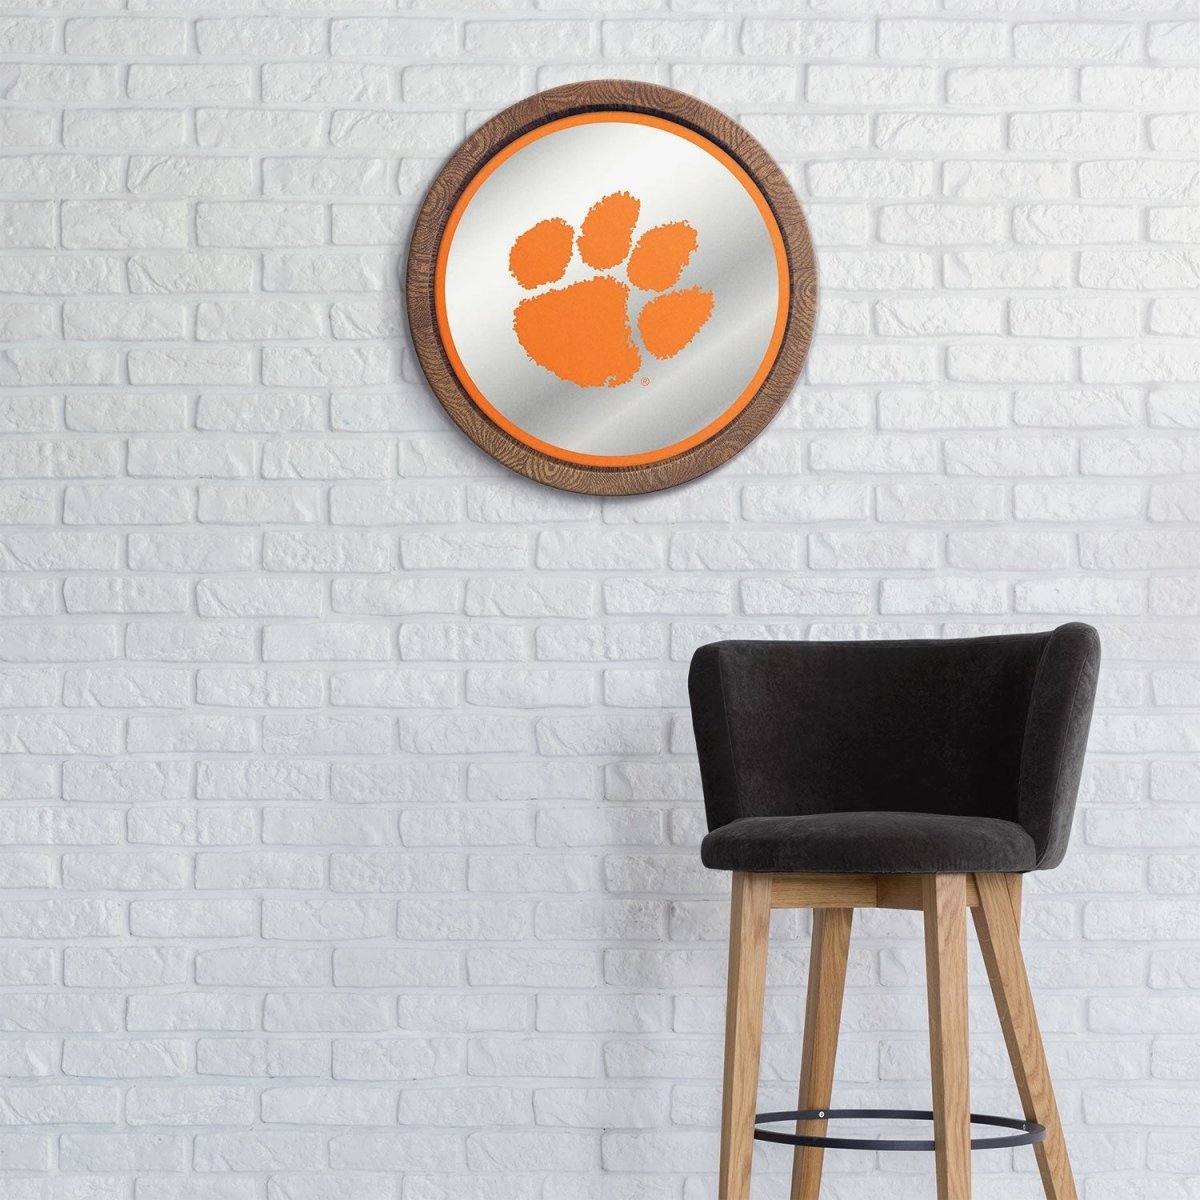 Clemson Tigers: Paw Print - Barrel Top Mirrored Wall Sign - The Fan-Brand